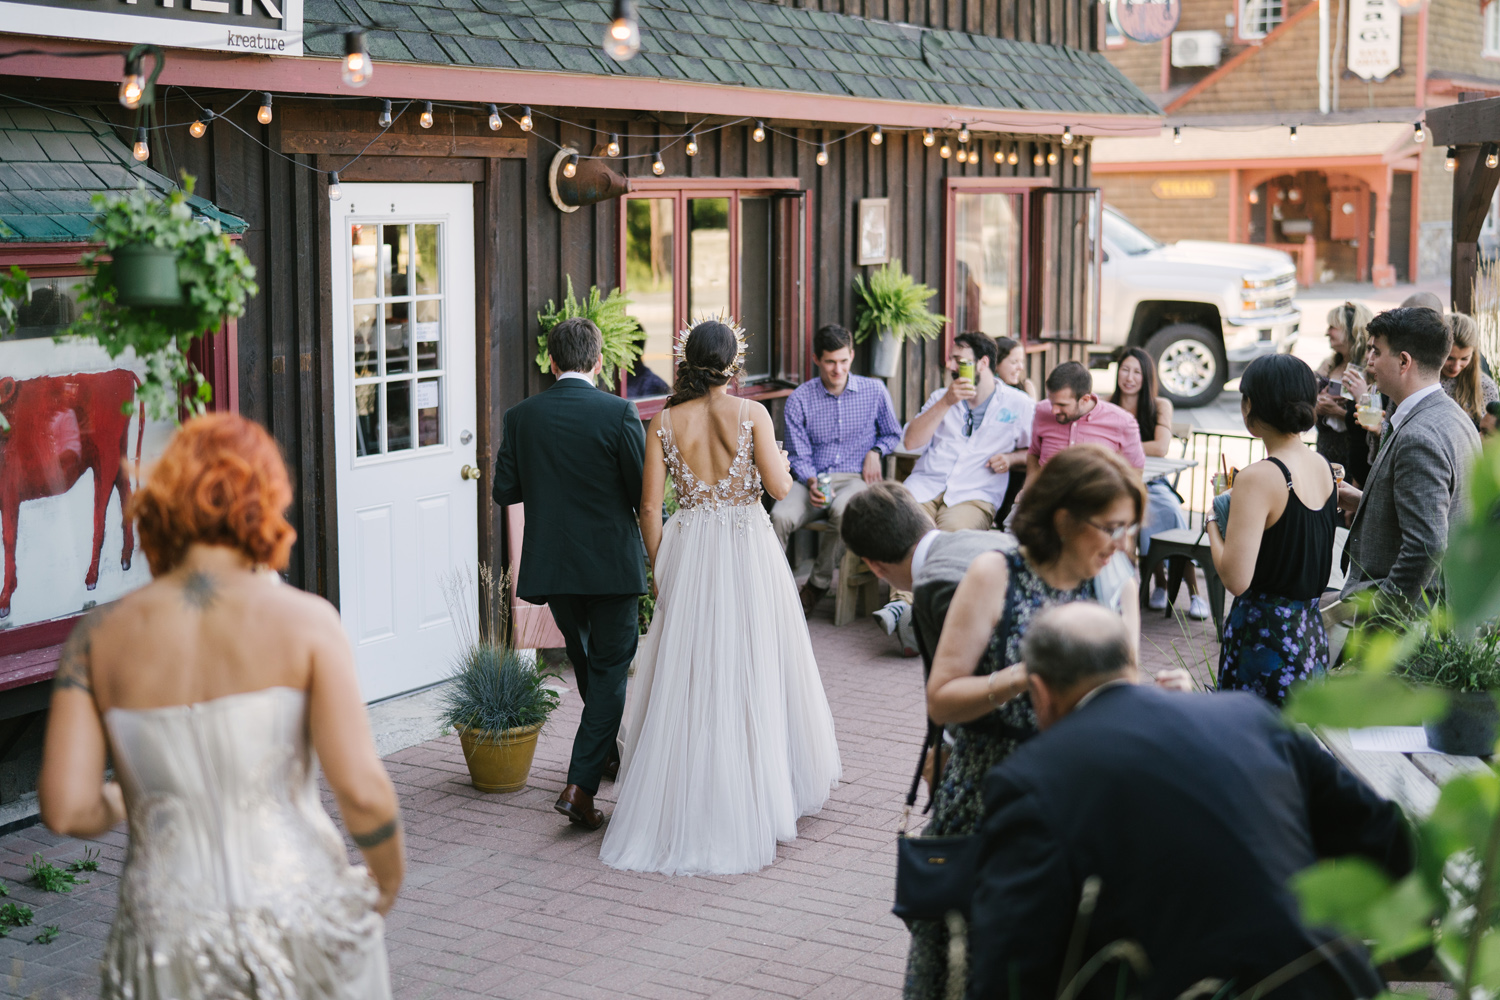 Adirondack Mountain Wedding | Liquids and Solids Restaurant Wedding Reception | Photographed by Mary Dougherty